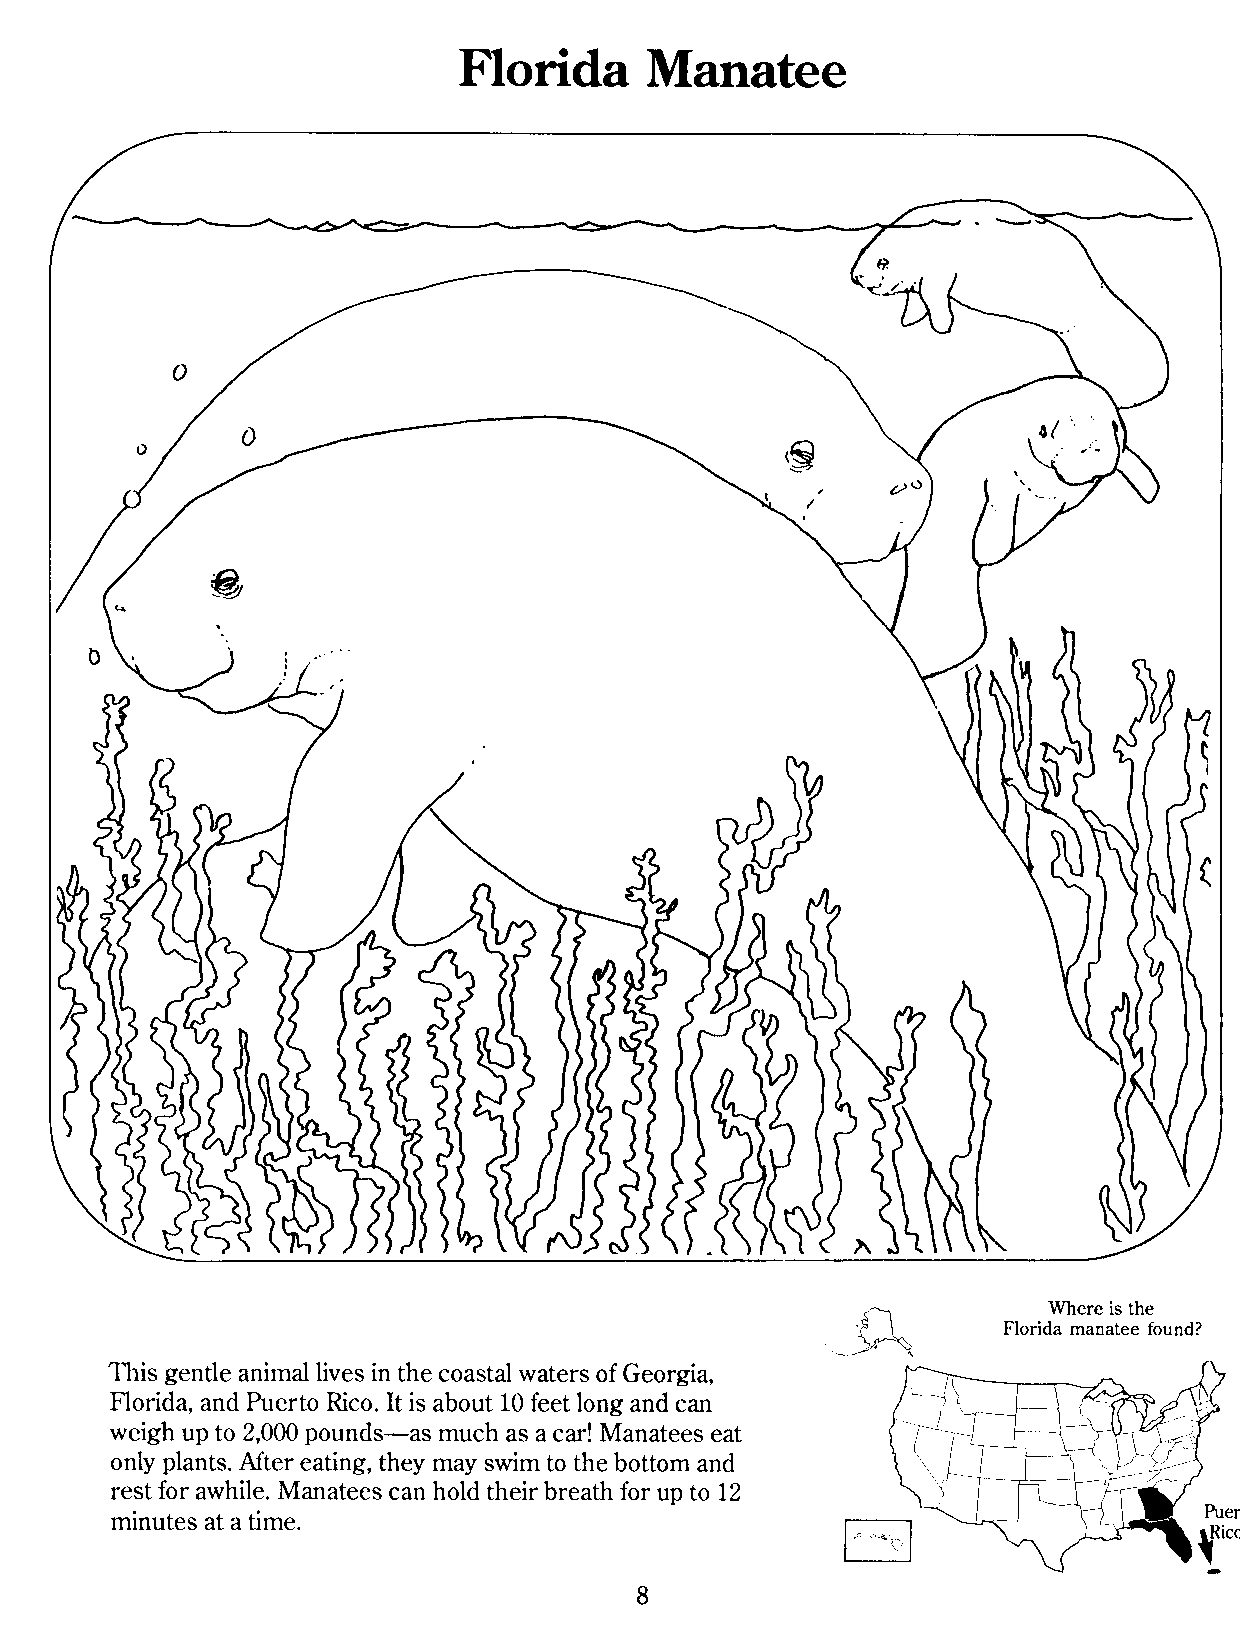 Filemanatee page from coloring bookgif